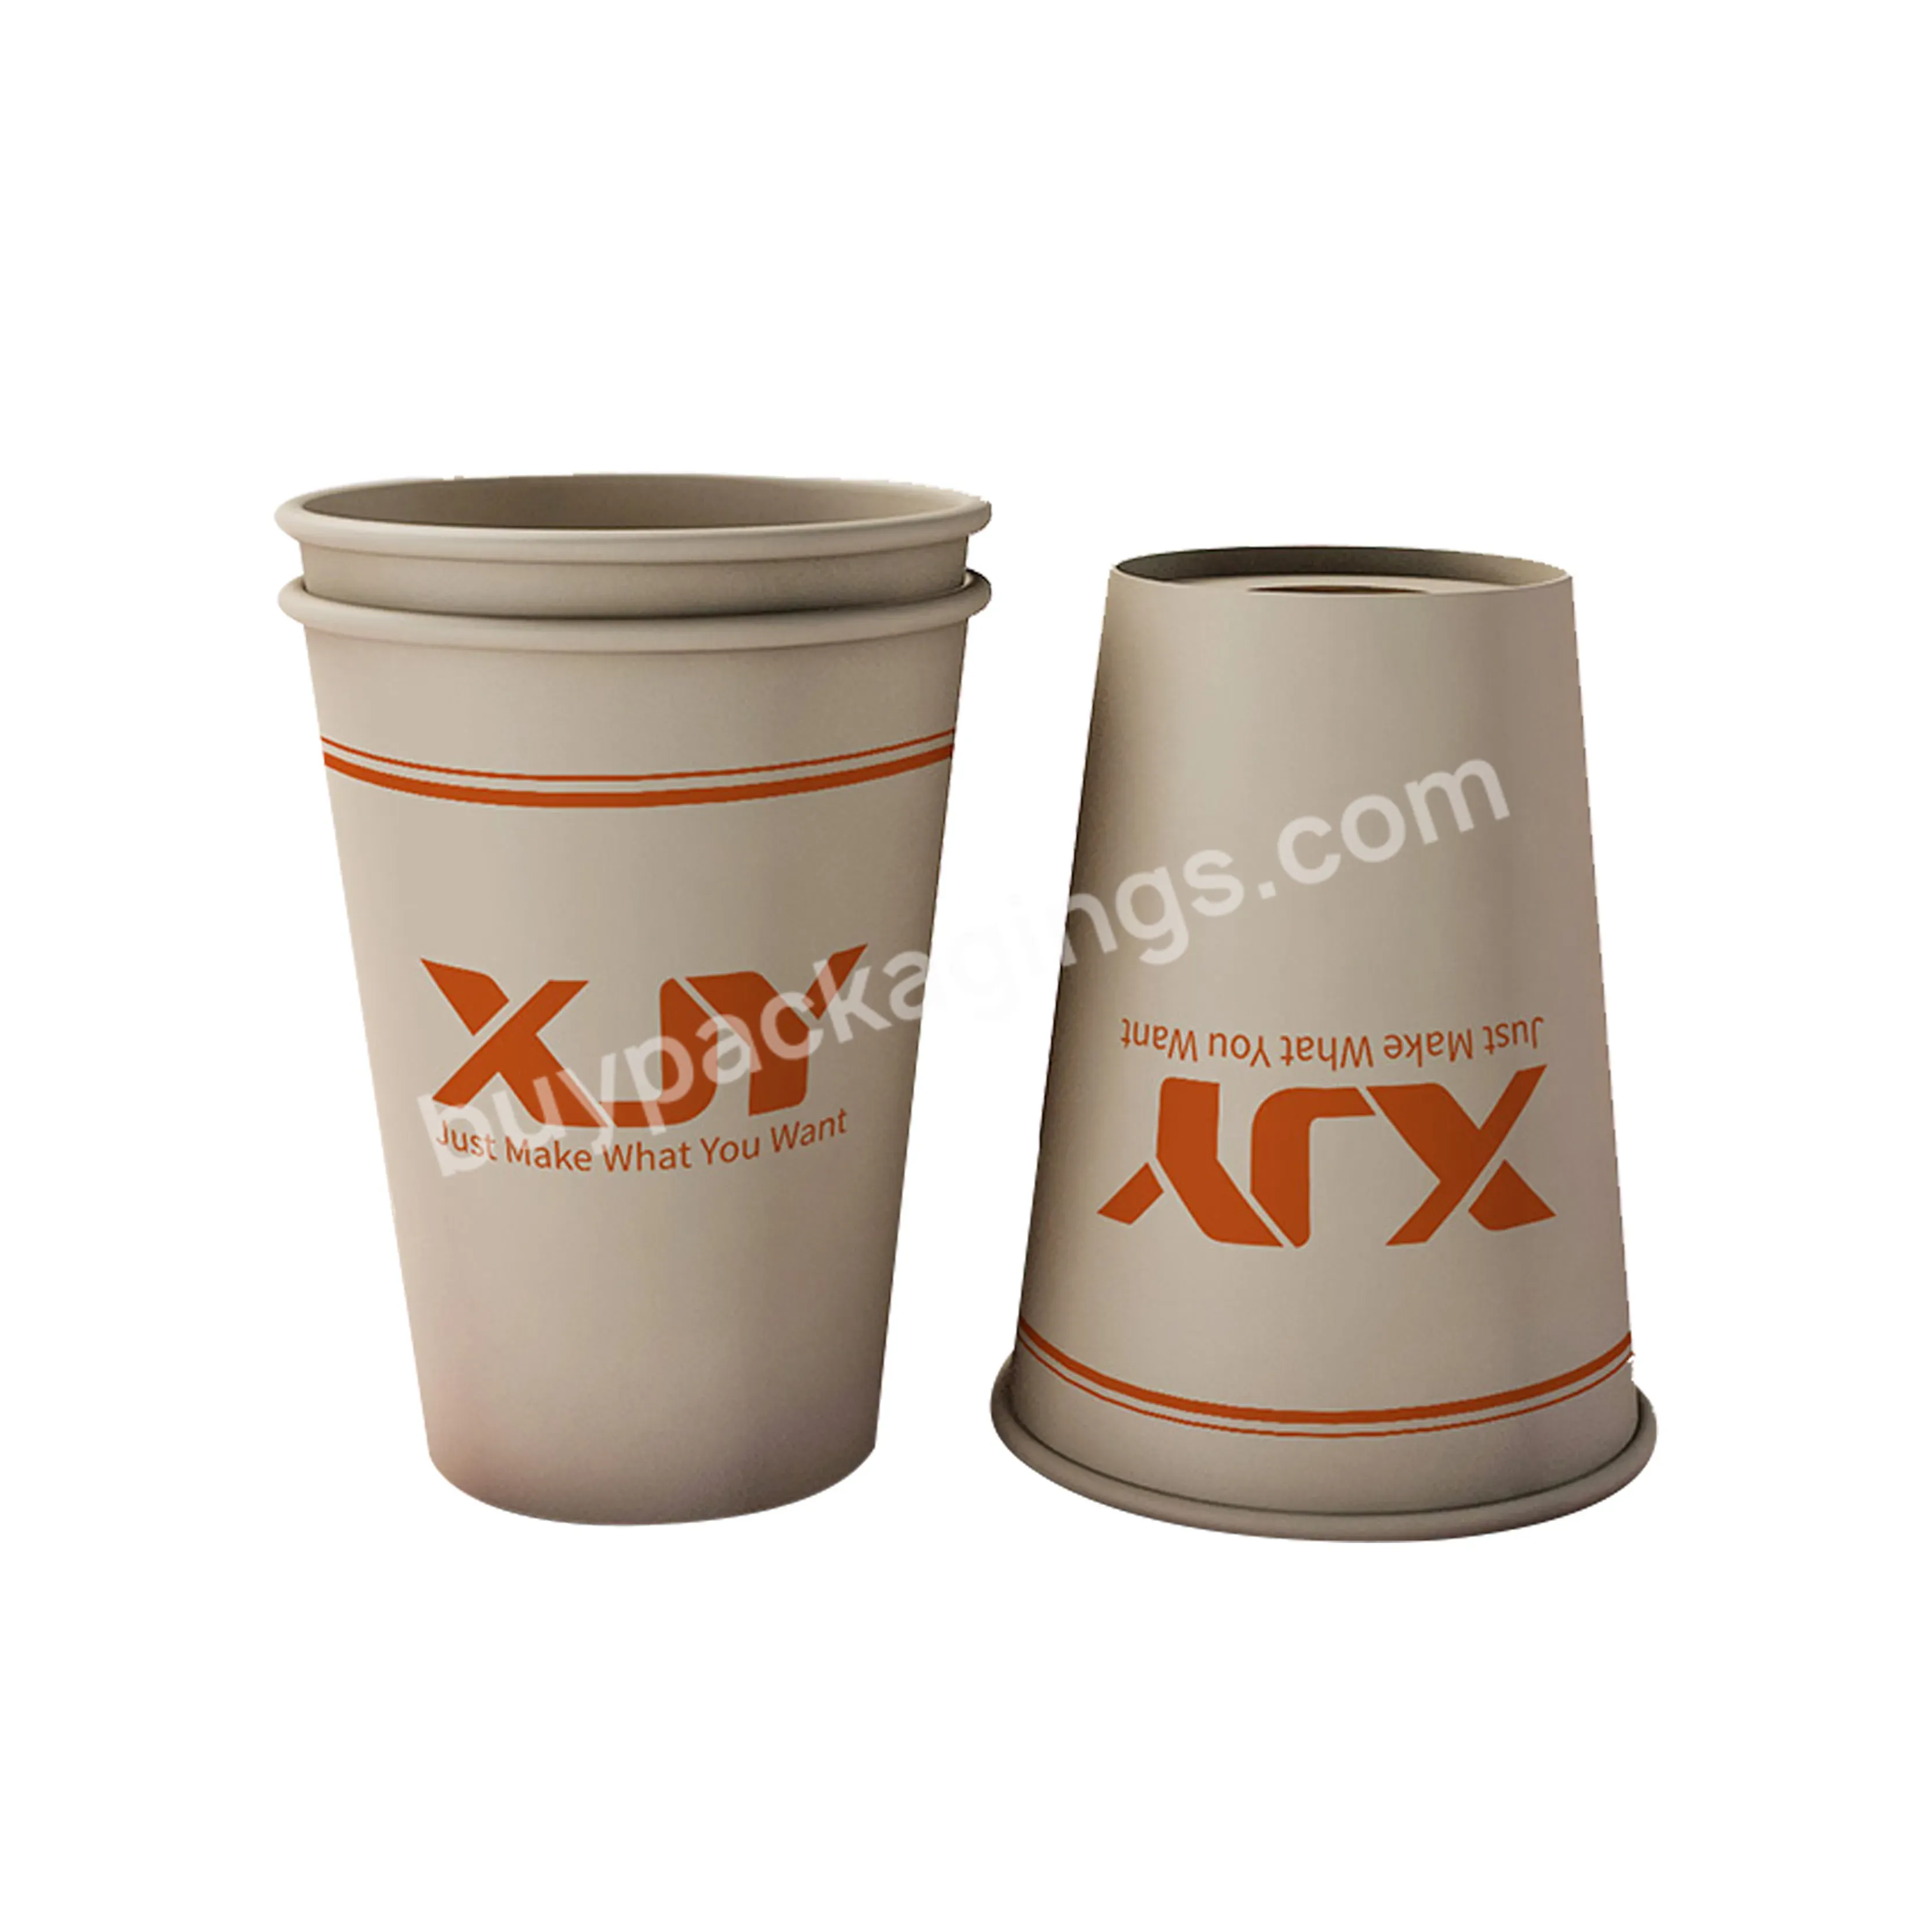 Xjy Customized Logo Printed Kraft Tripple Walled Ripple Cups Paper Coffee Cup Disposable With Lid For Hot Drinks